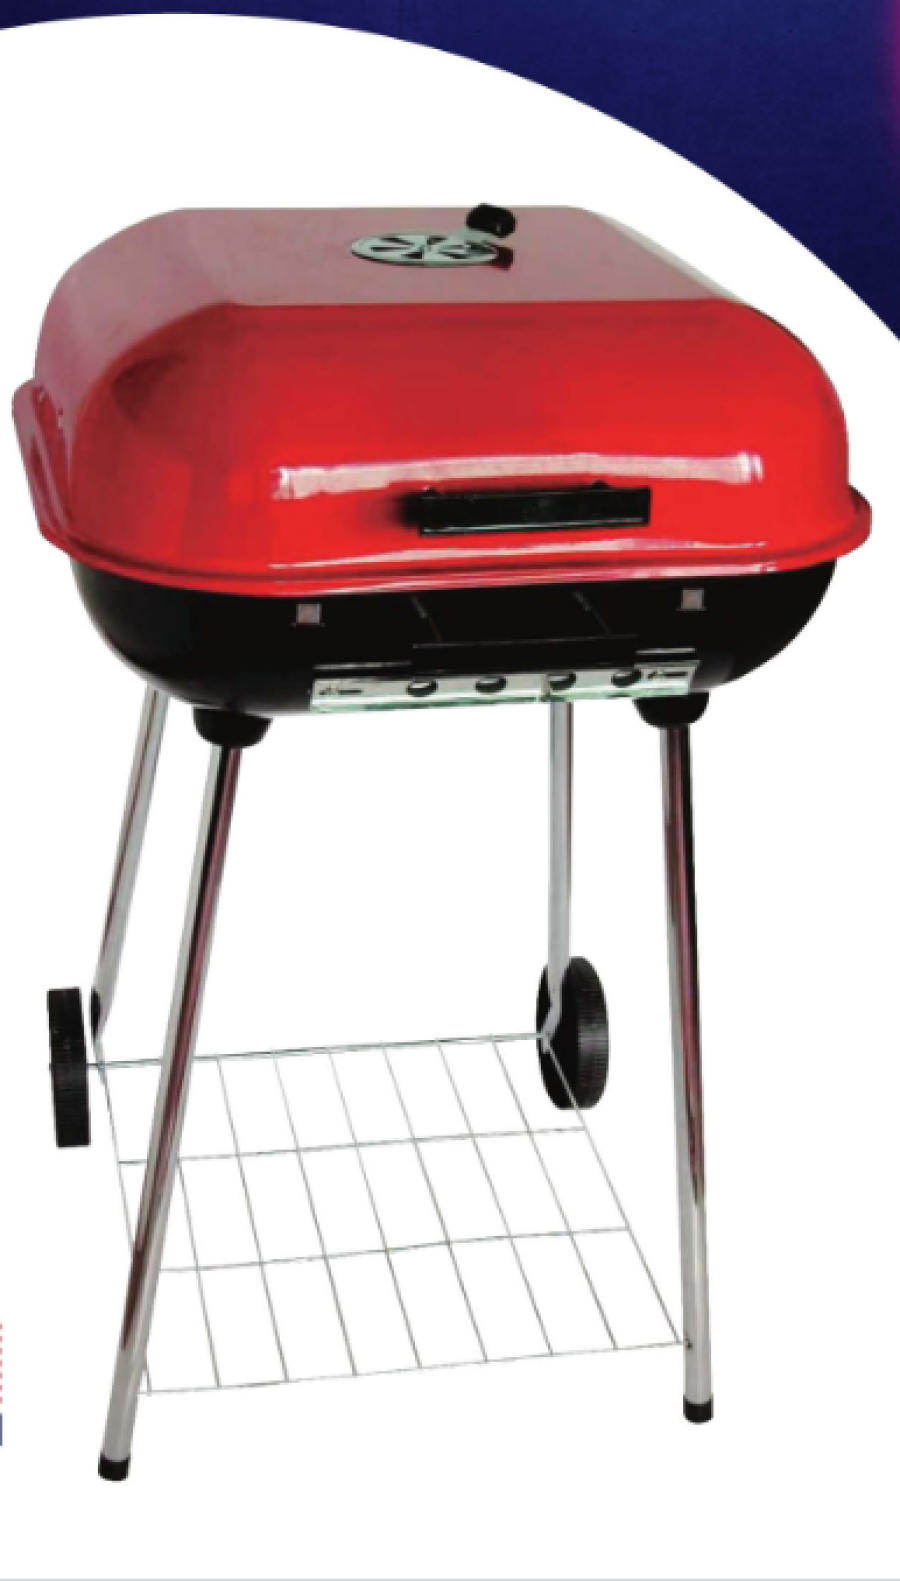 Admiral Charcoal Grill 18*18cms/71cm